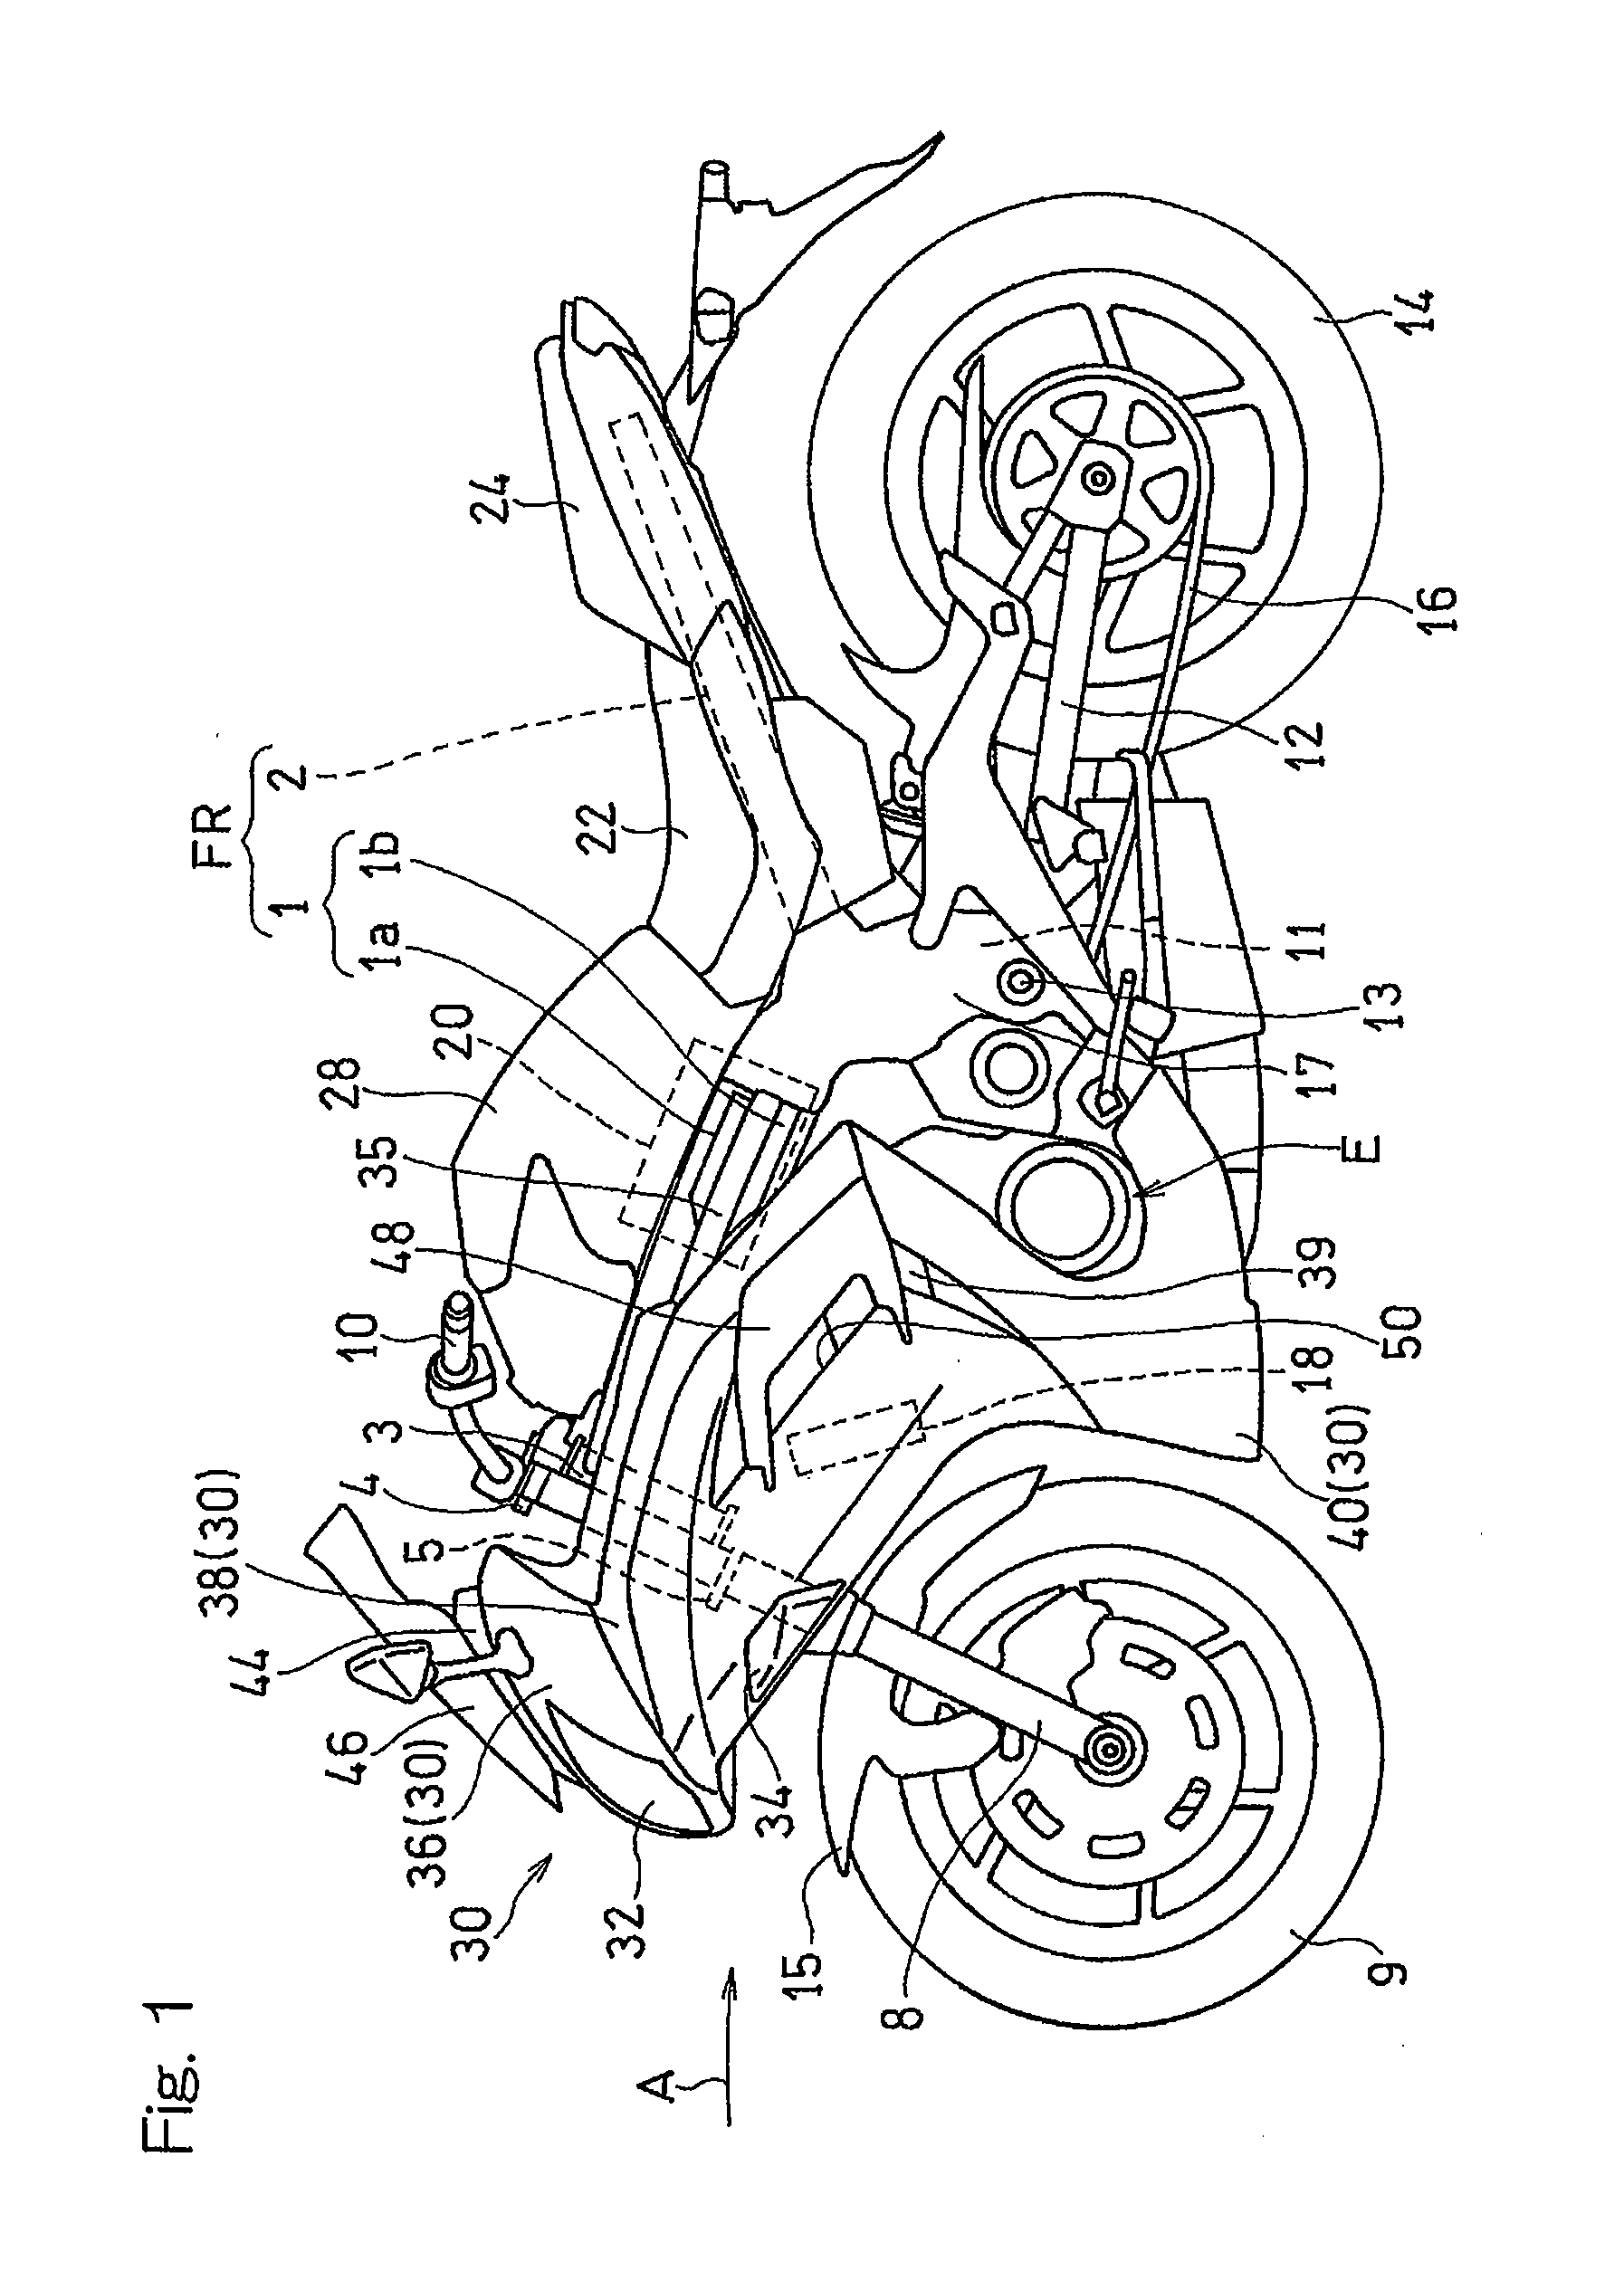 Air guiding structure for motorcycles